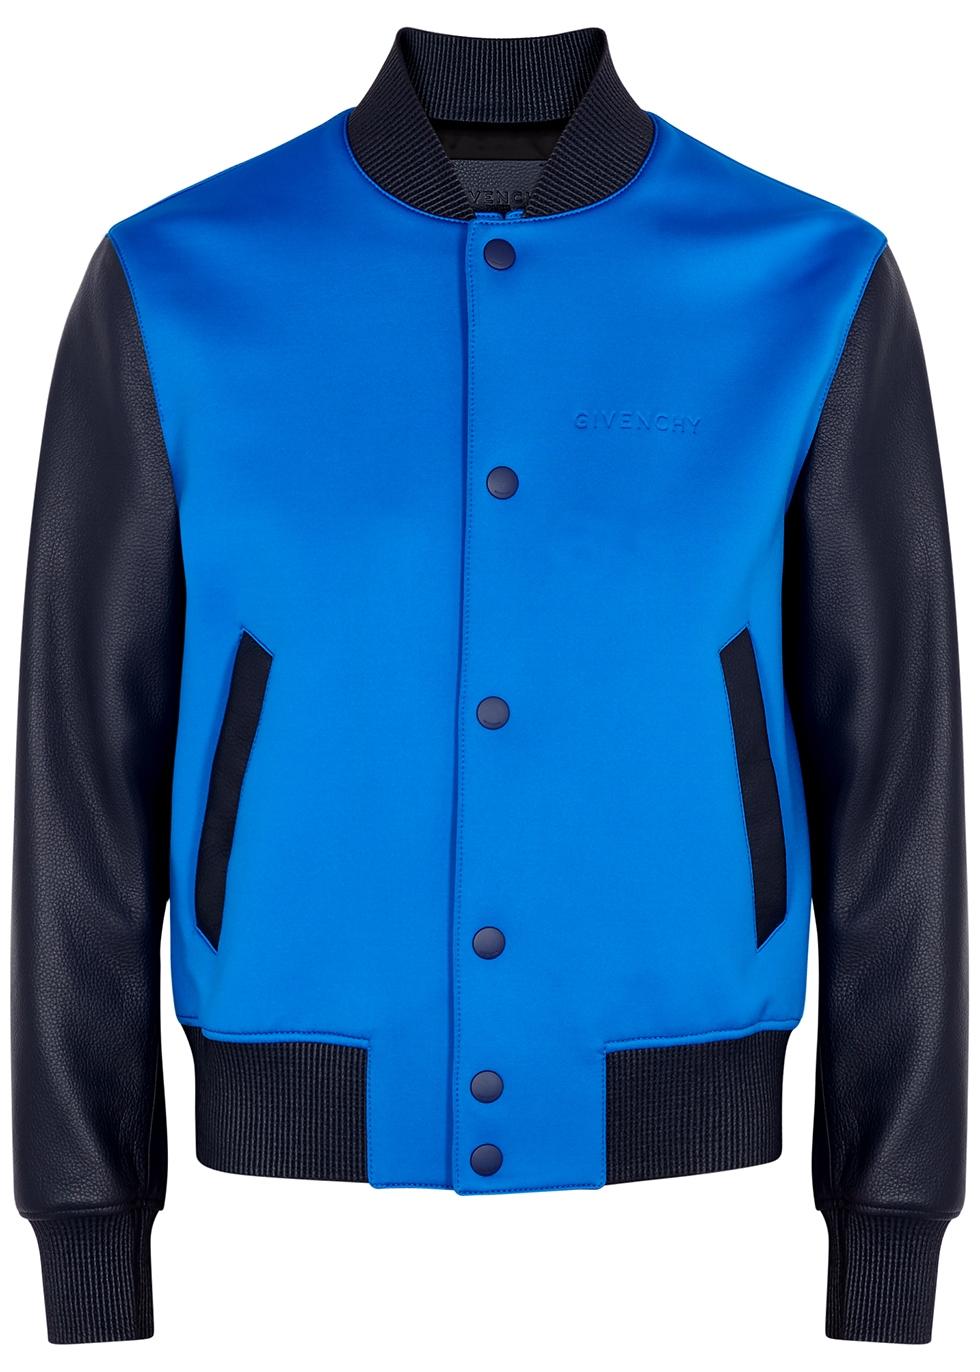 Givenchy Blue Neoprene And Leather Bomber Jacket for Men - Lyst